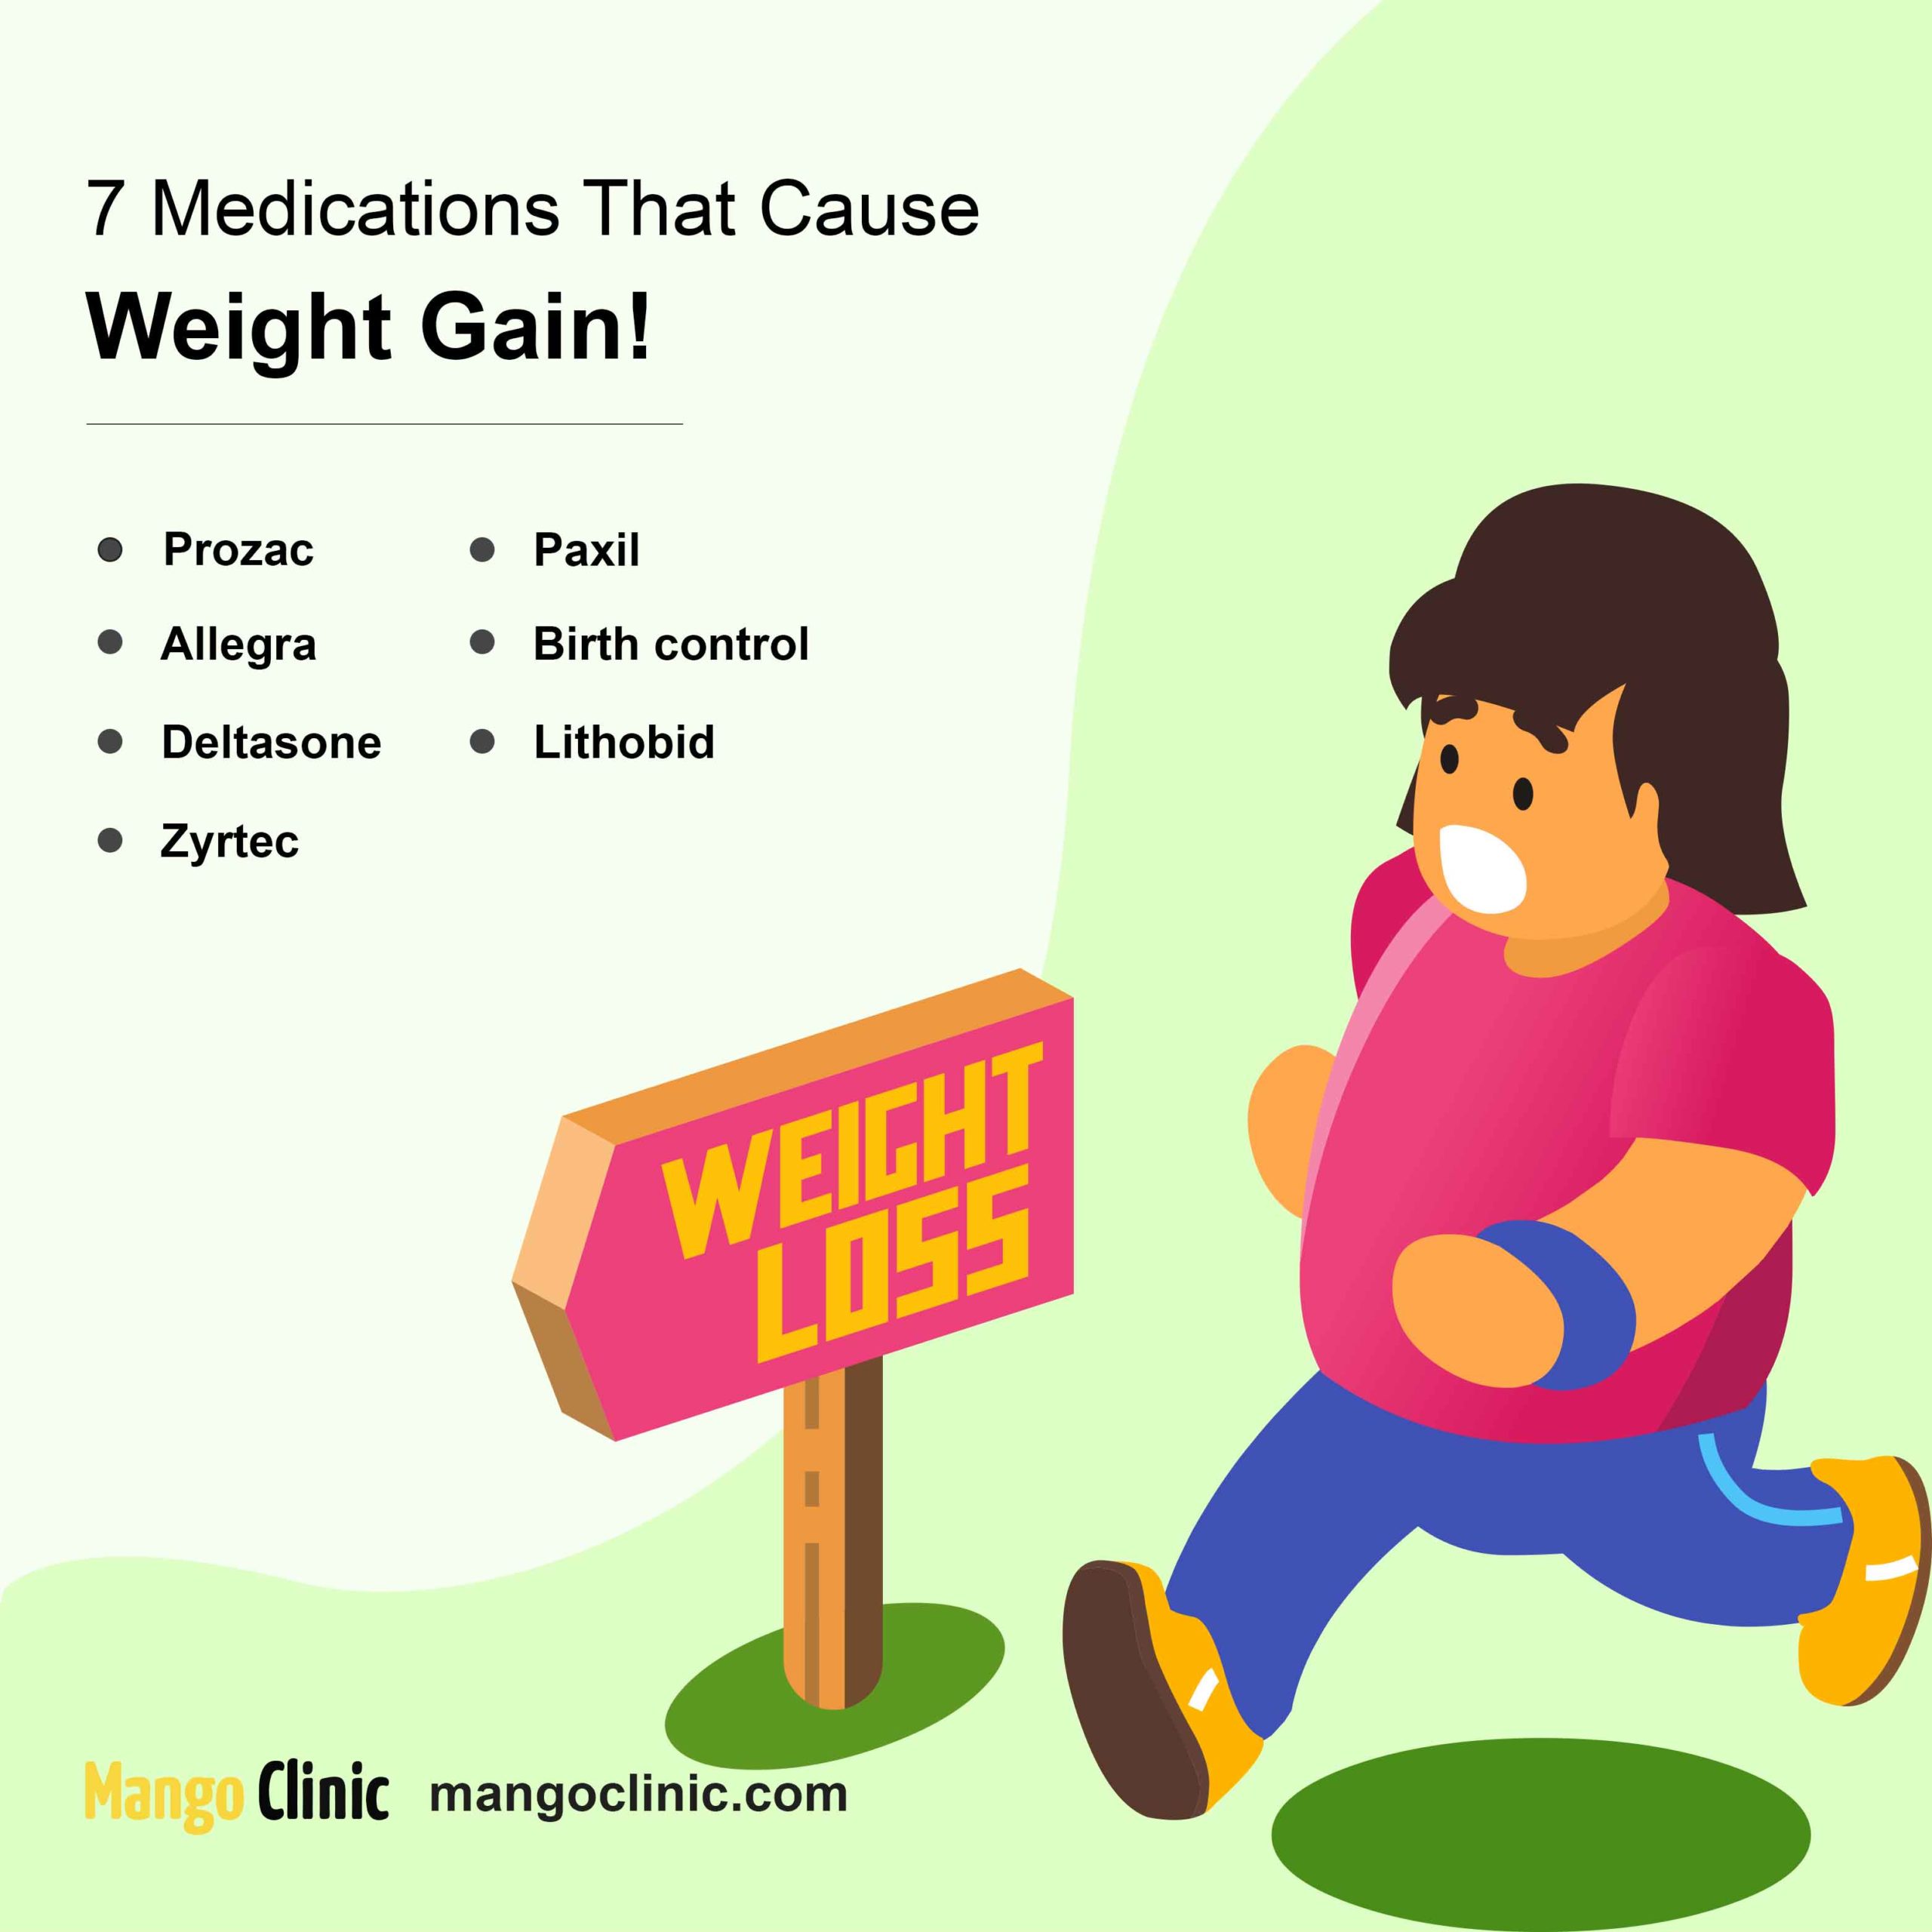 7 medications that cause weight gain